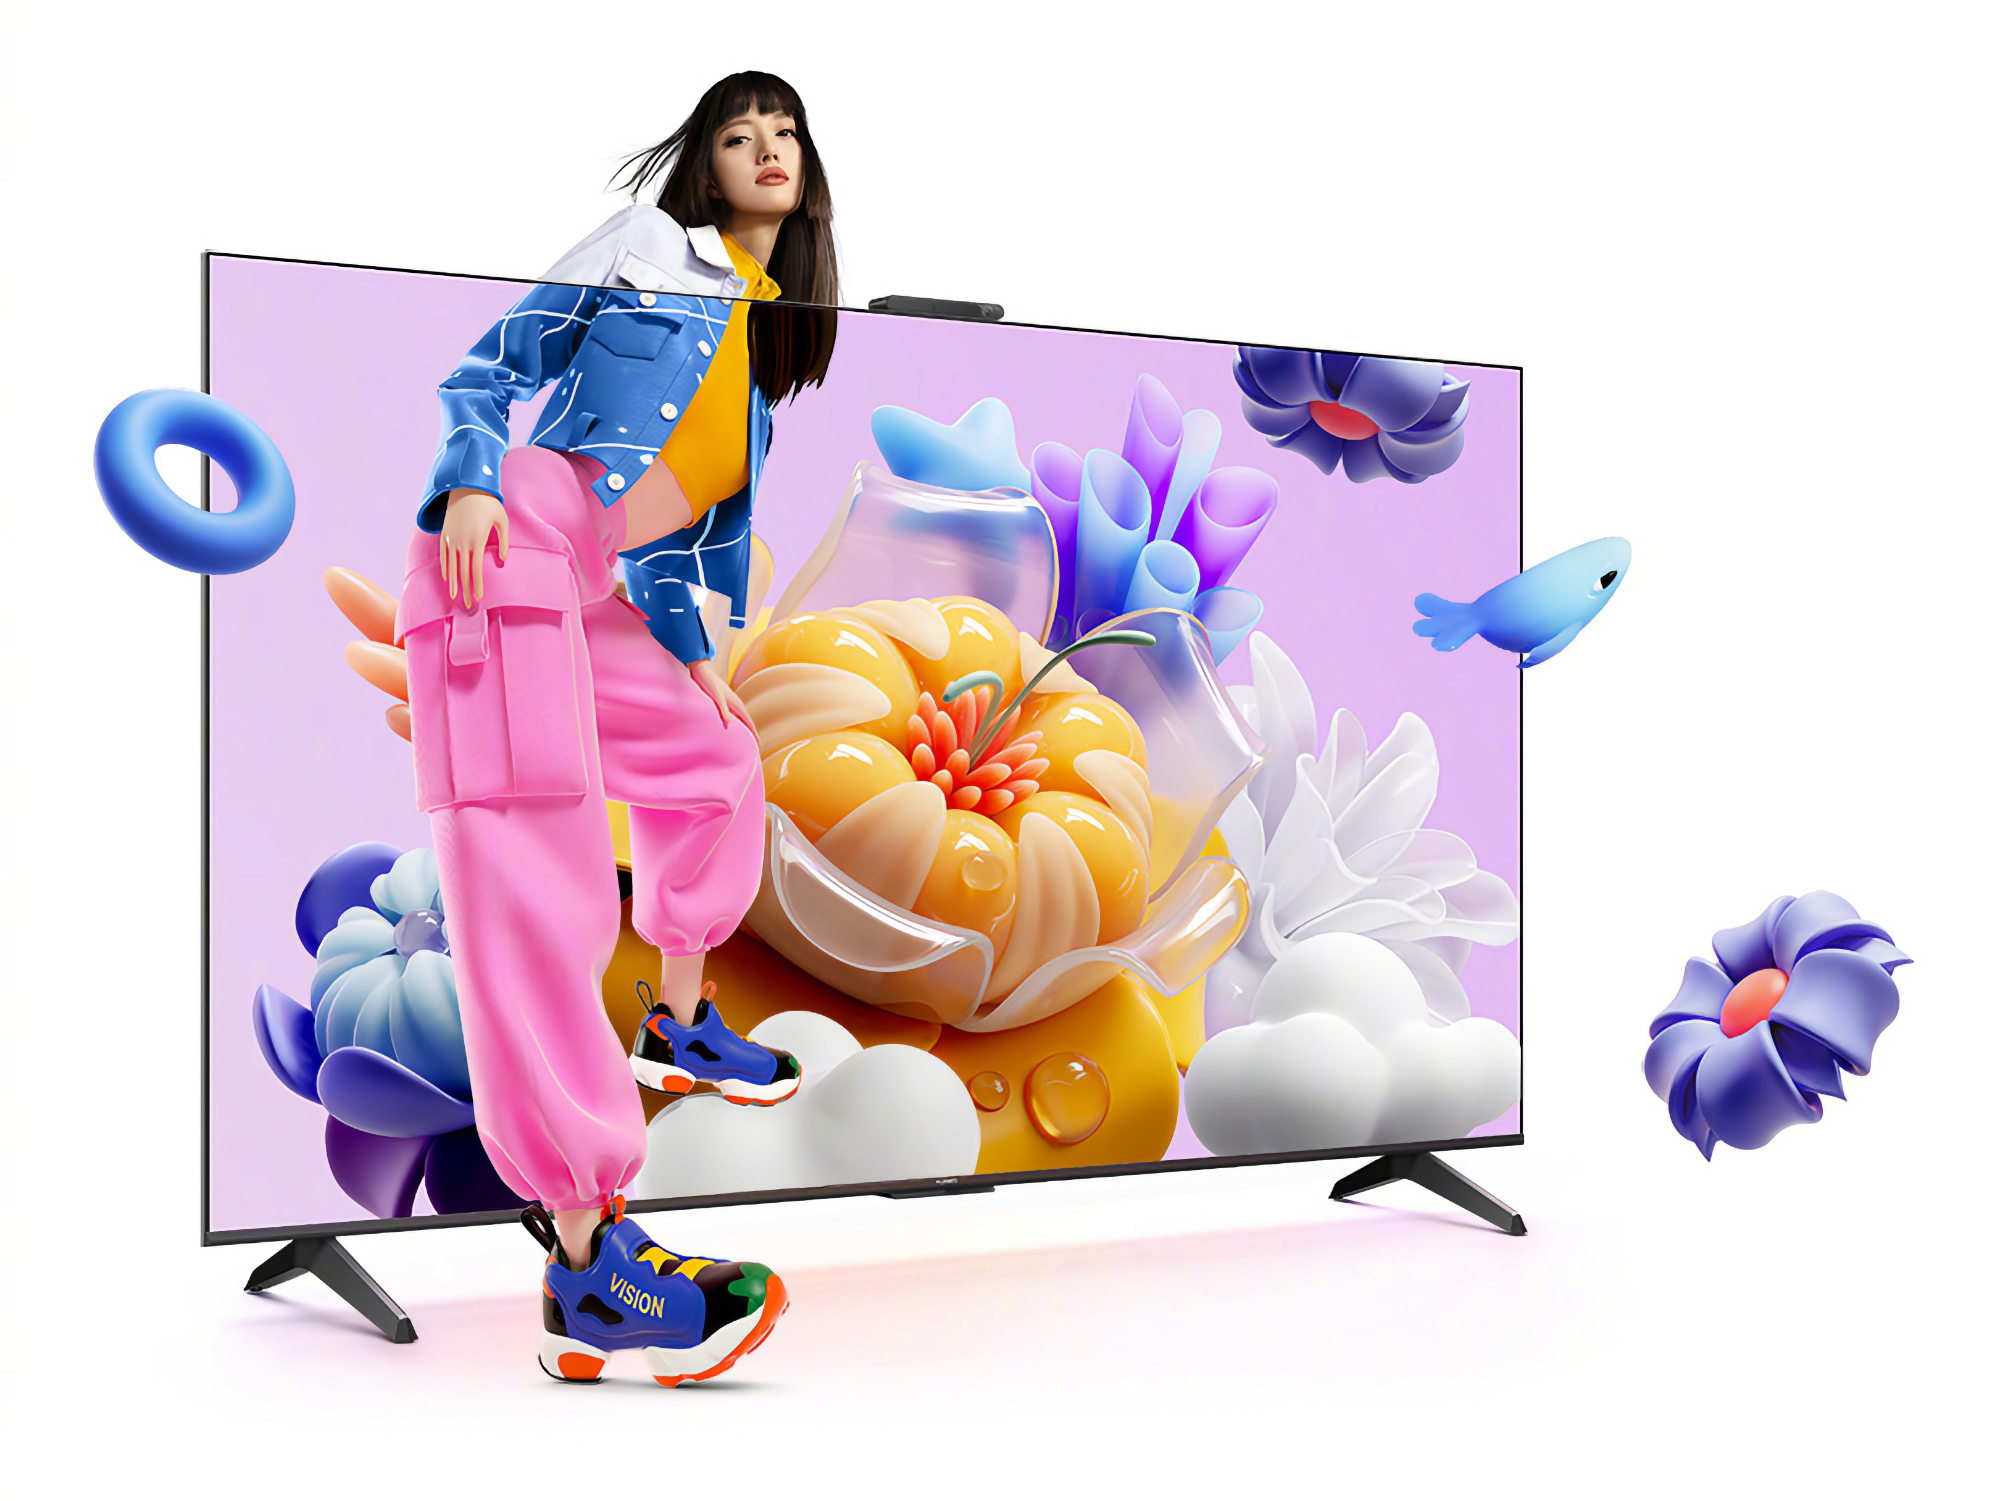 Huawei Vision Smart TV SE3: a range of smart TVs with 4K screens at 120Hz and HarmonyOS on board priced from $340